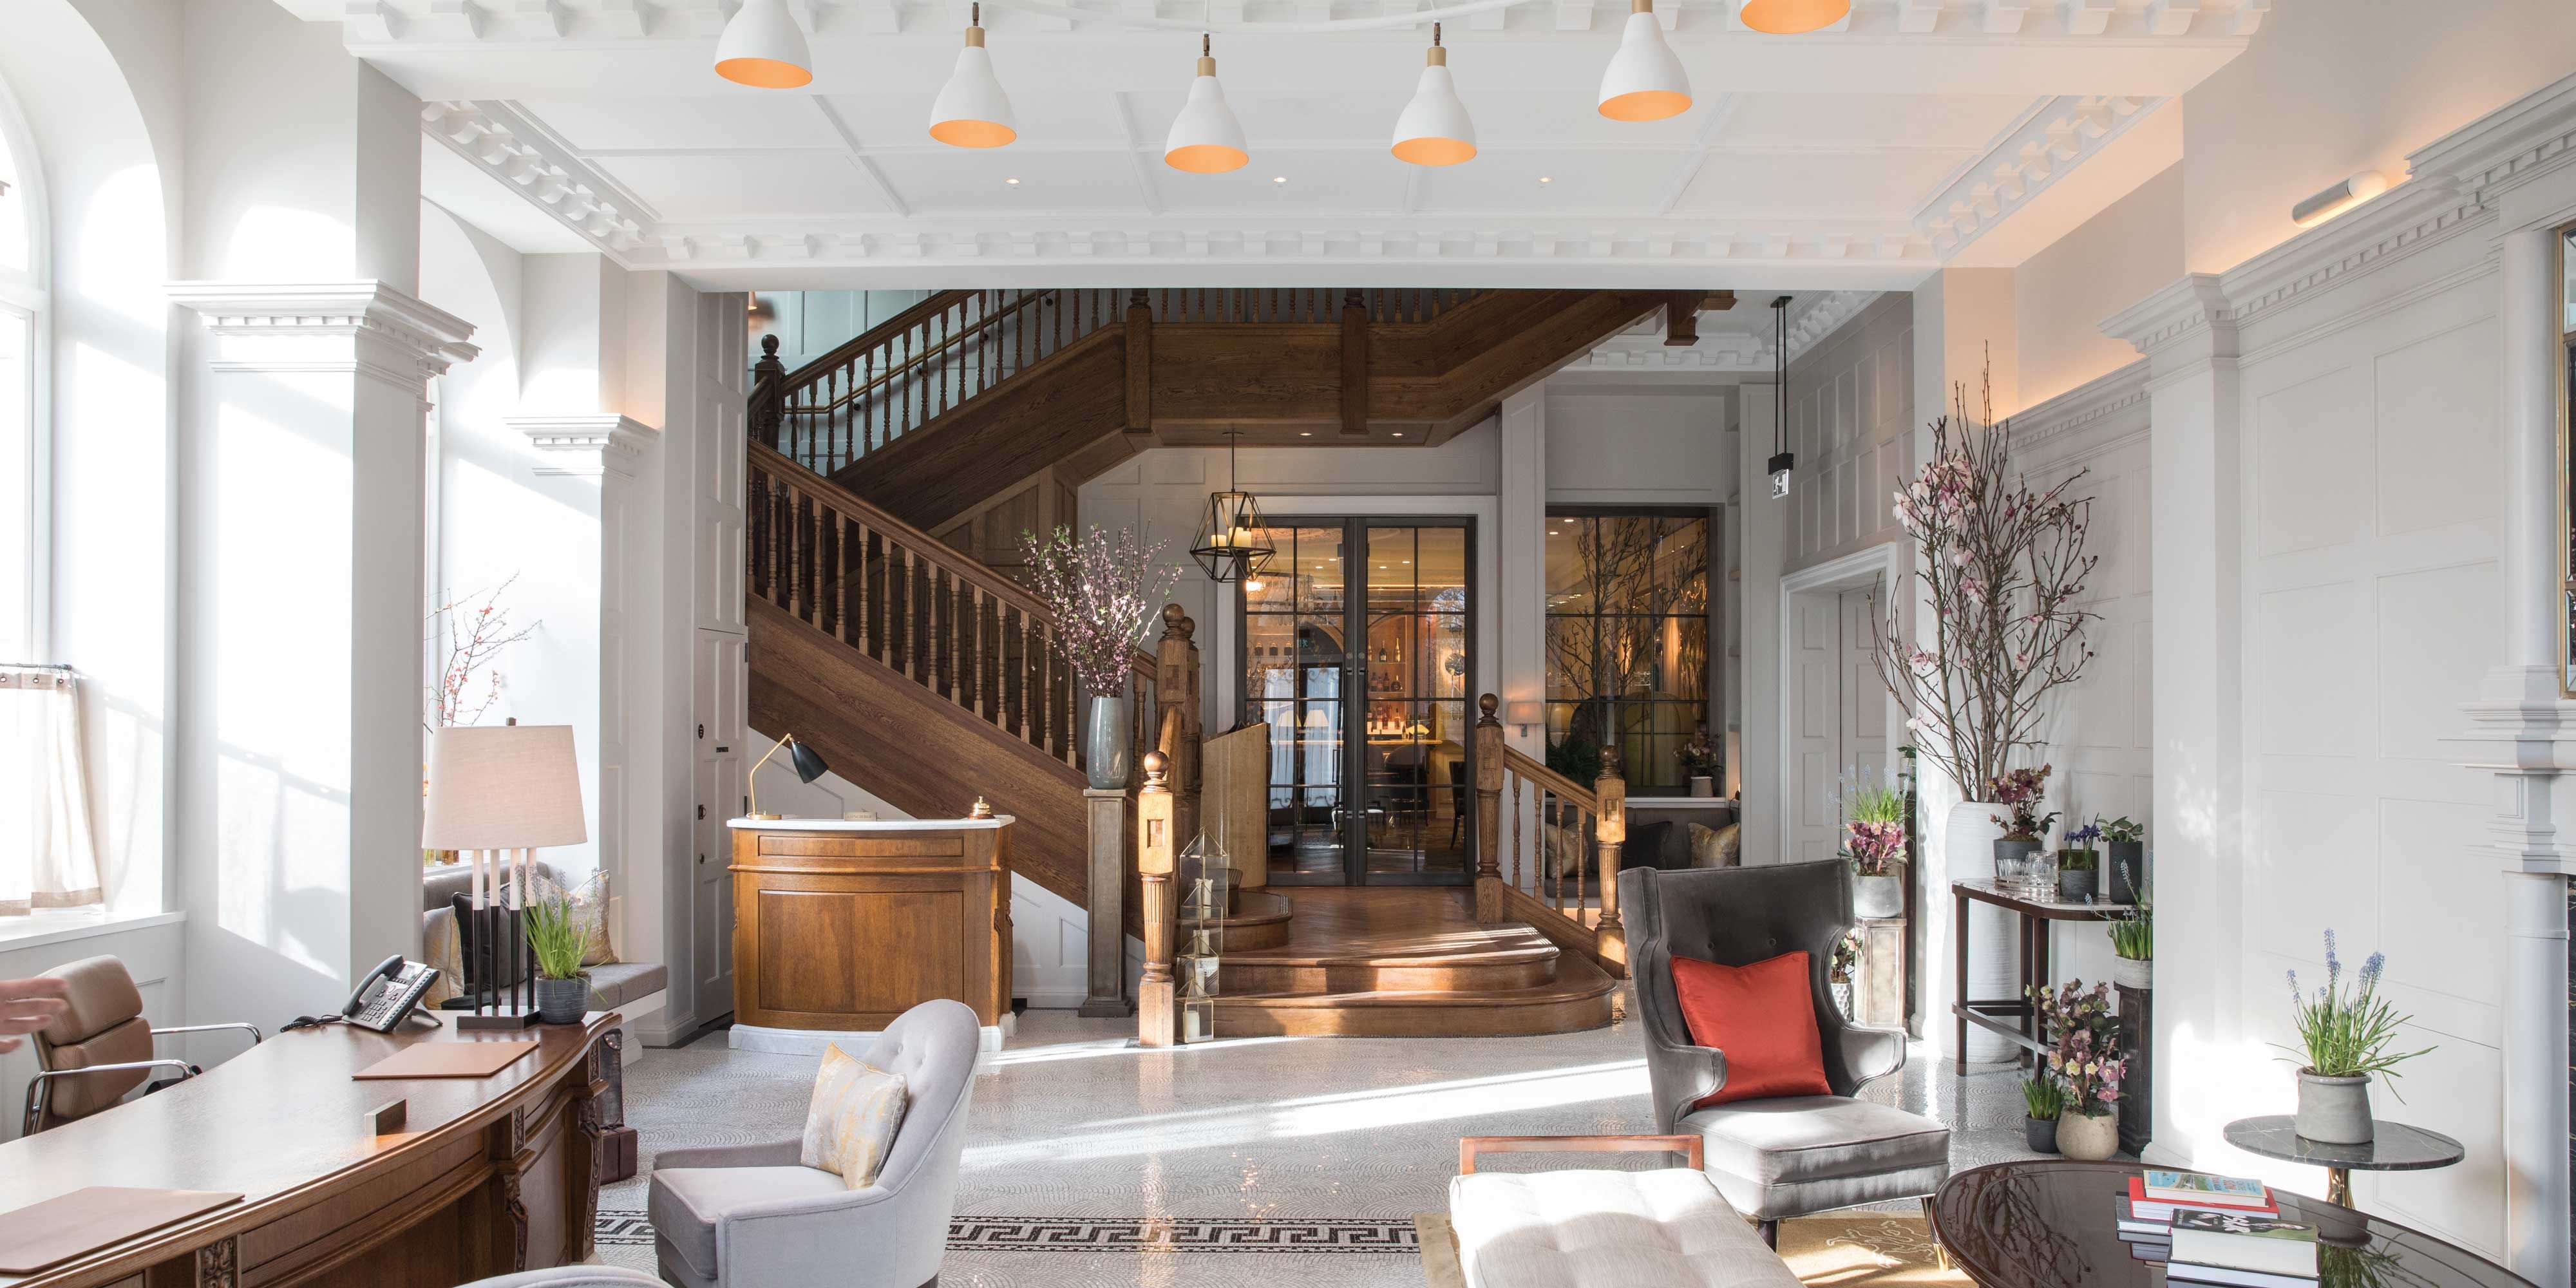 This Historic Chelsea Hotel Has Been Restored To Its Former Glory